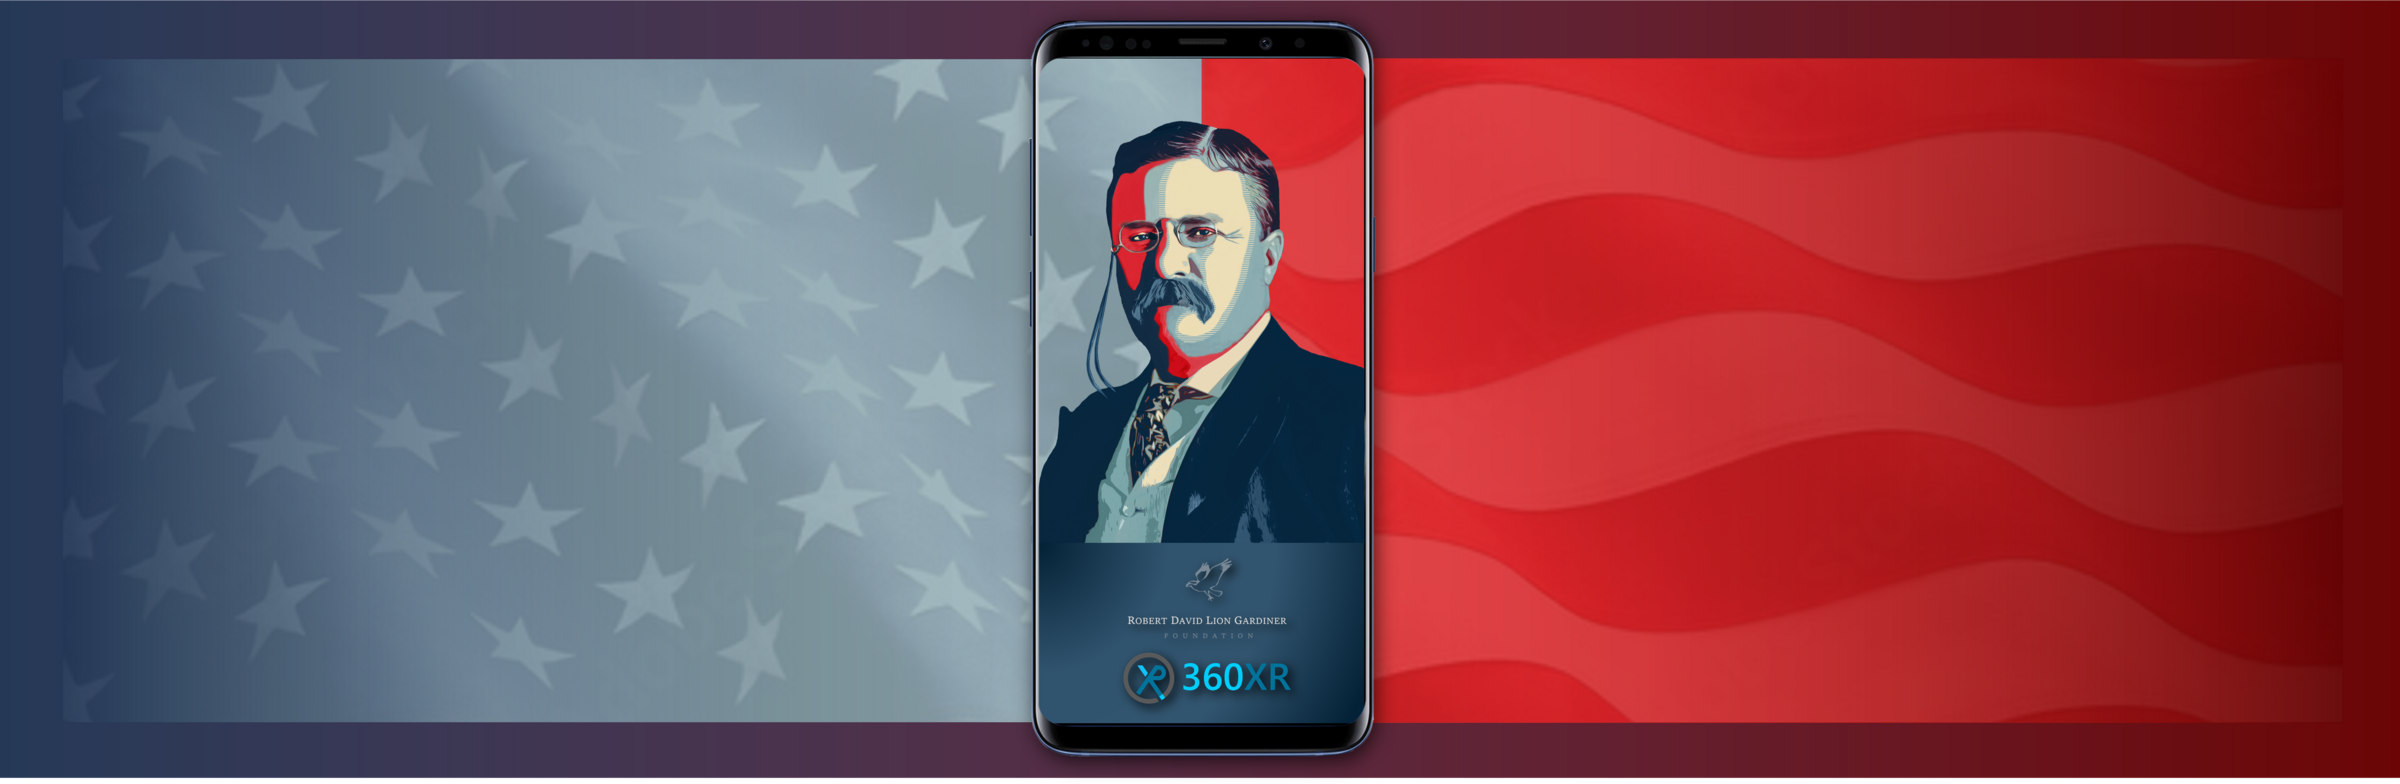 Digital mockup of an illustration of Theodore Roosevelt on a phone screen. Behind it is an American flag.